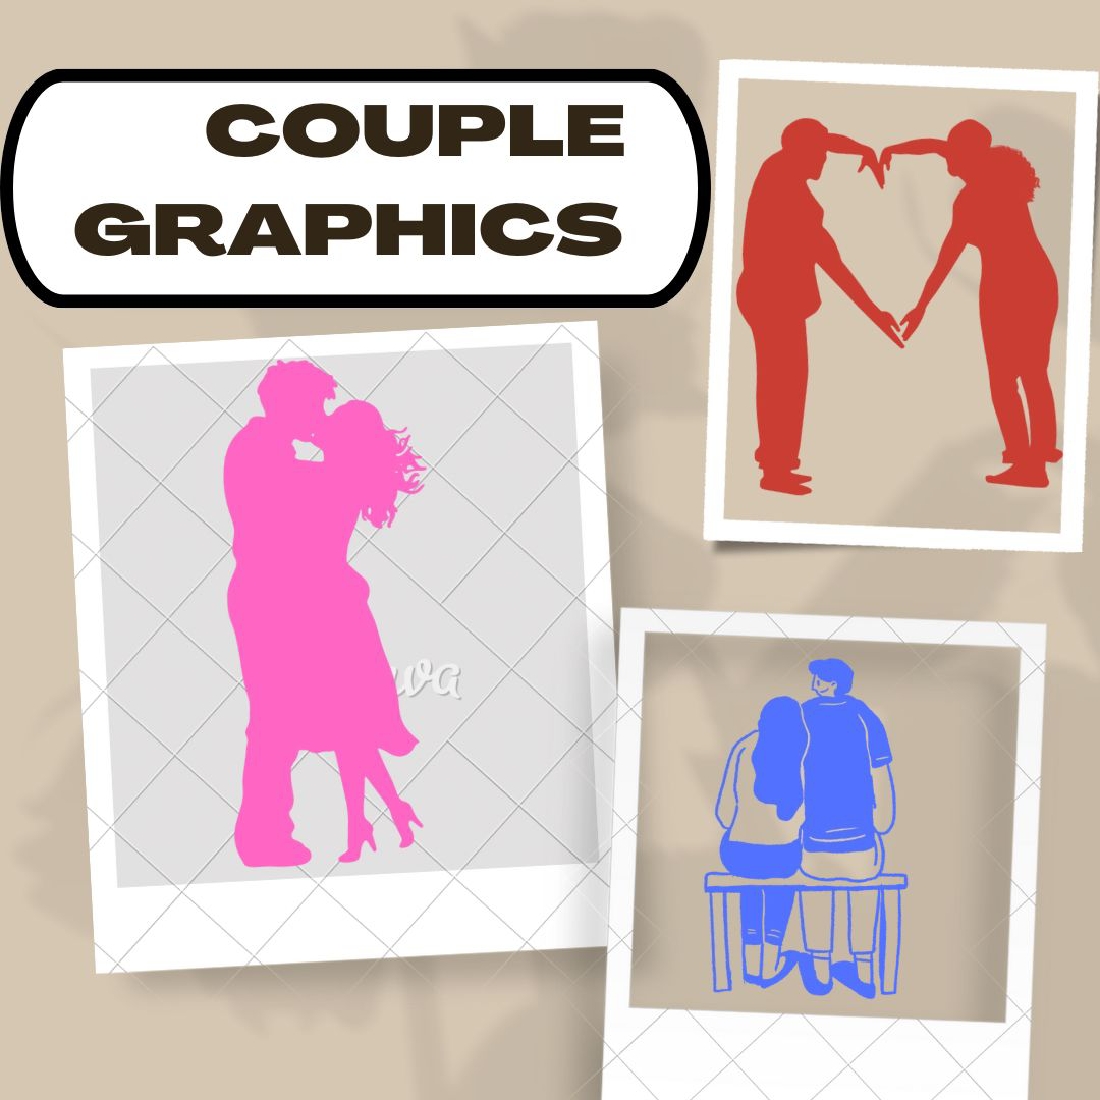 Couple graphics cover image.